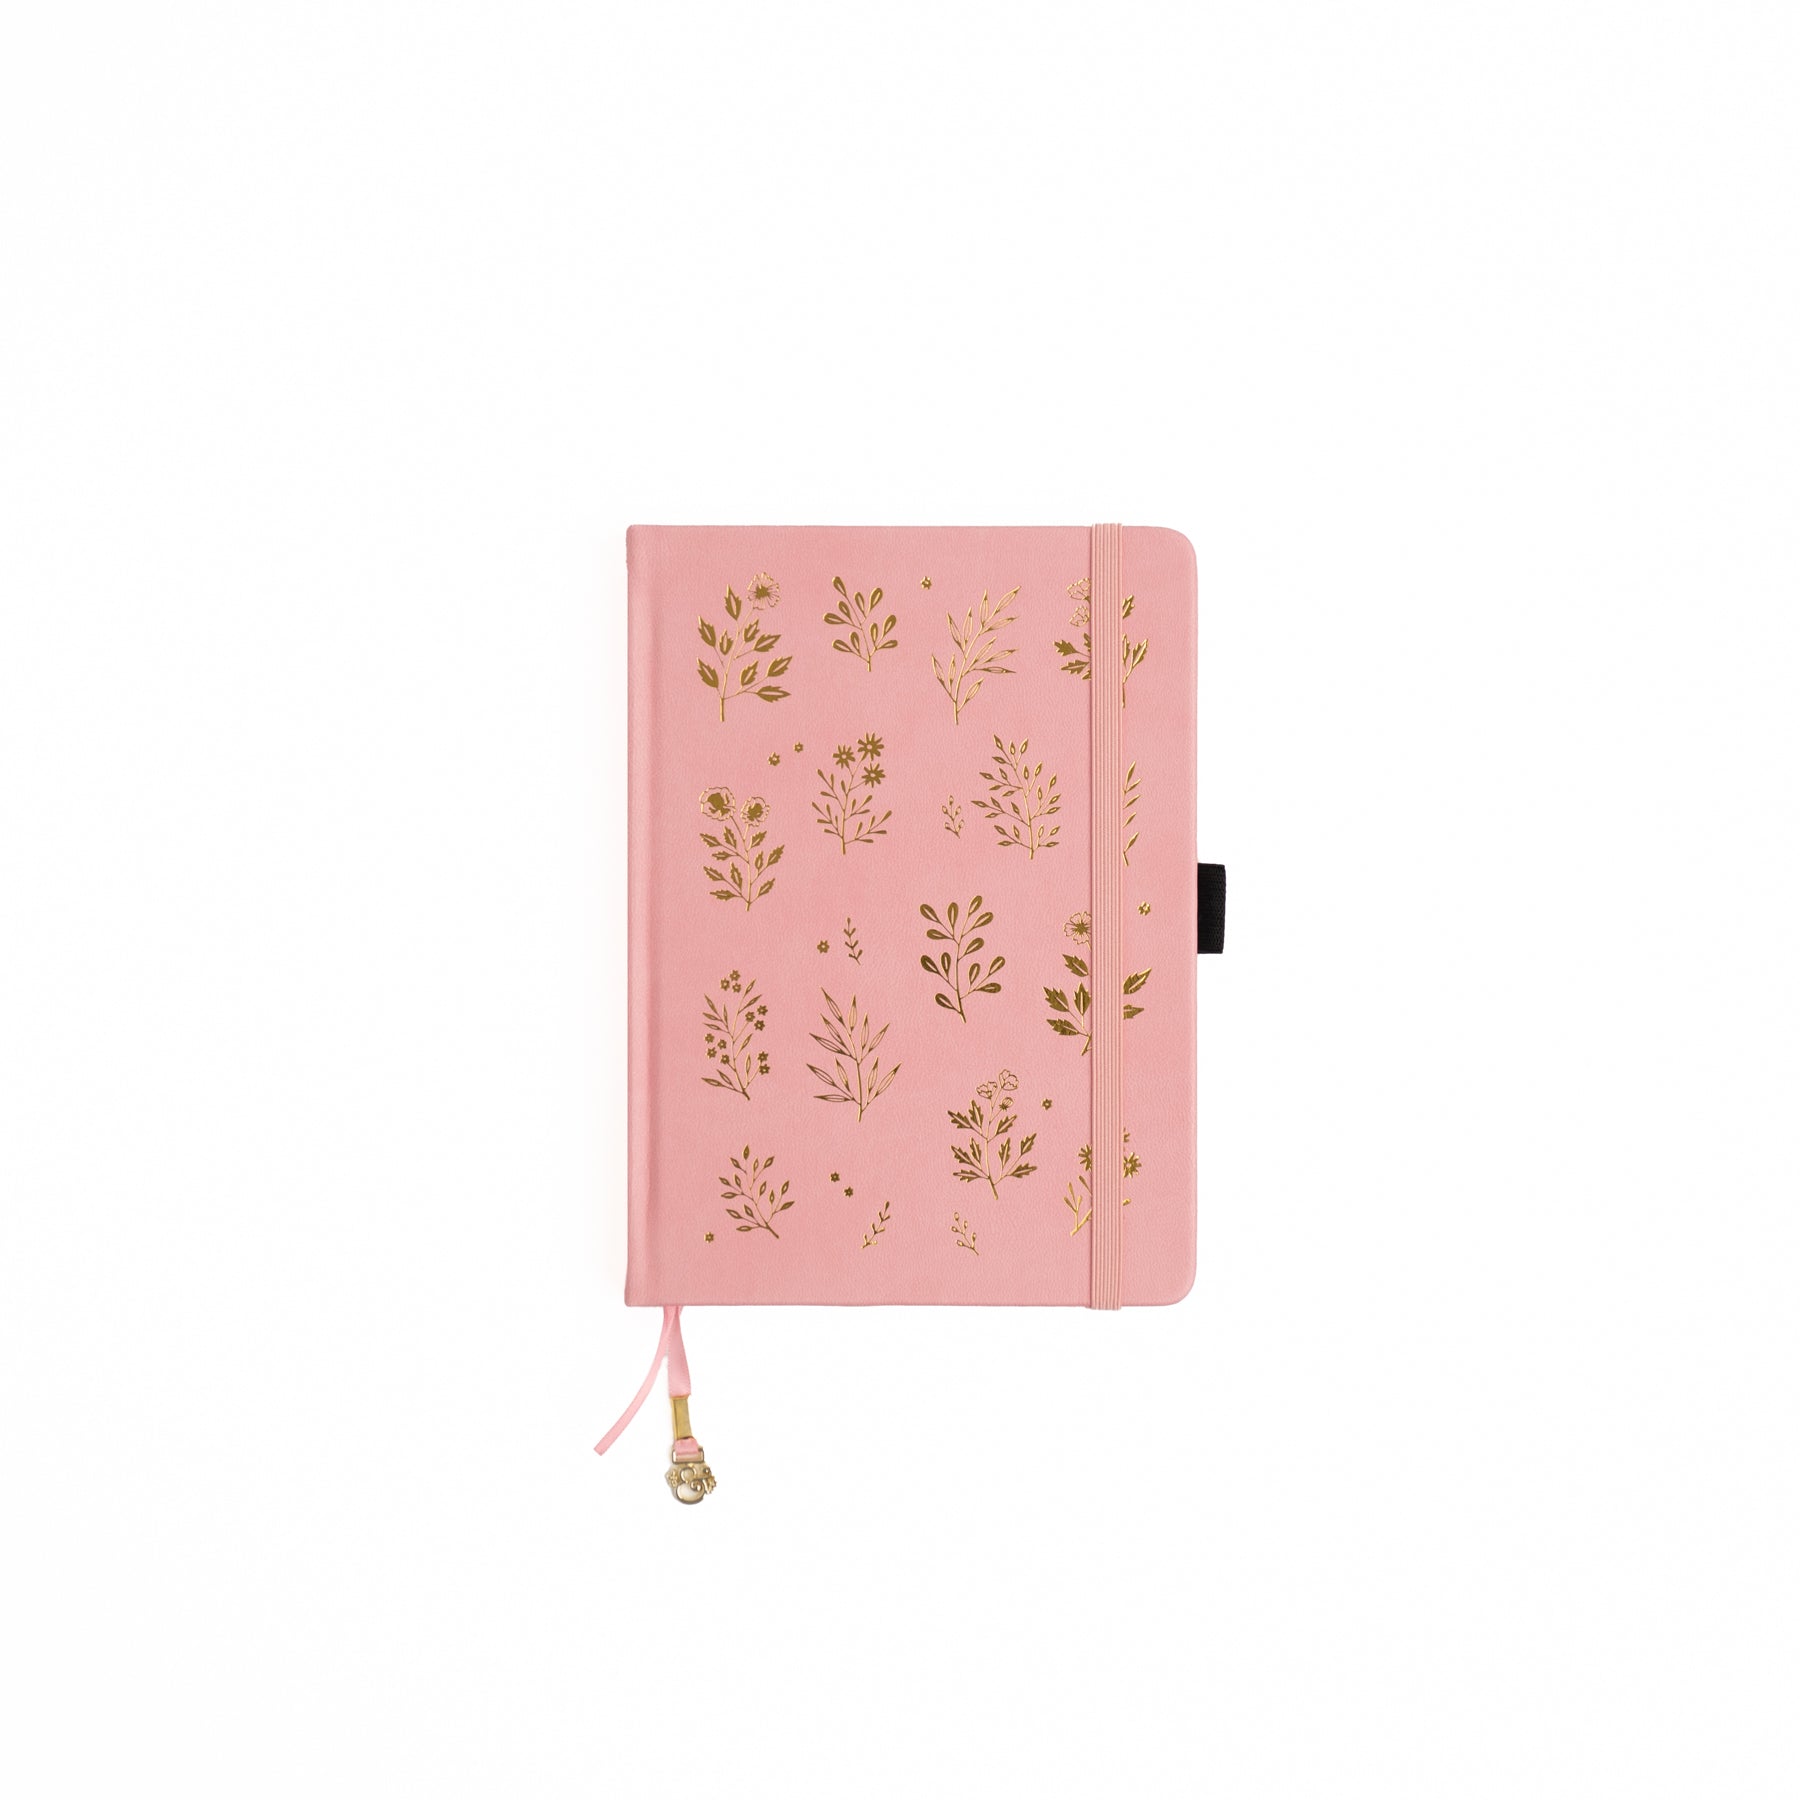 Purrfect Companion Dot Grid Notebook A6: 112 Pages